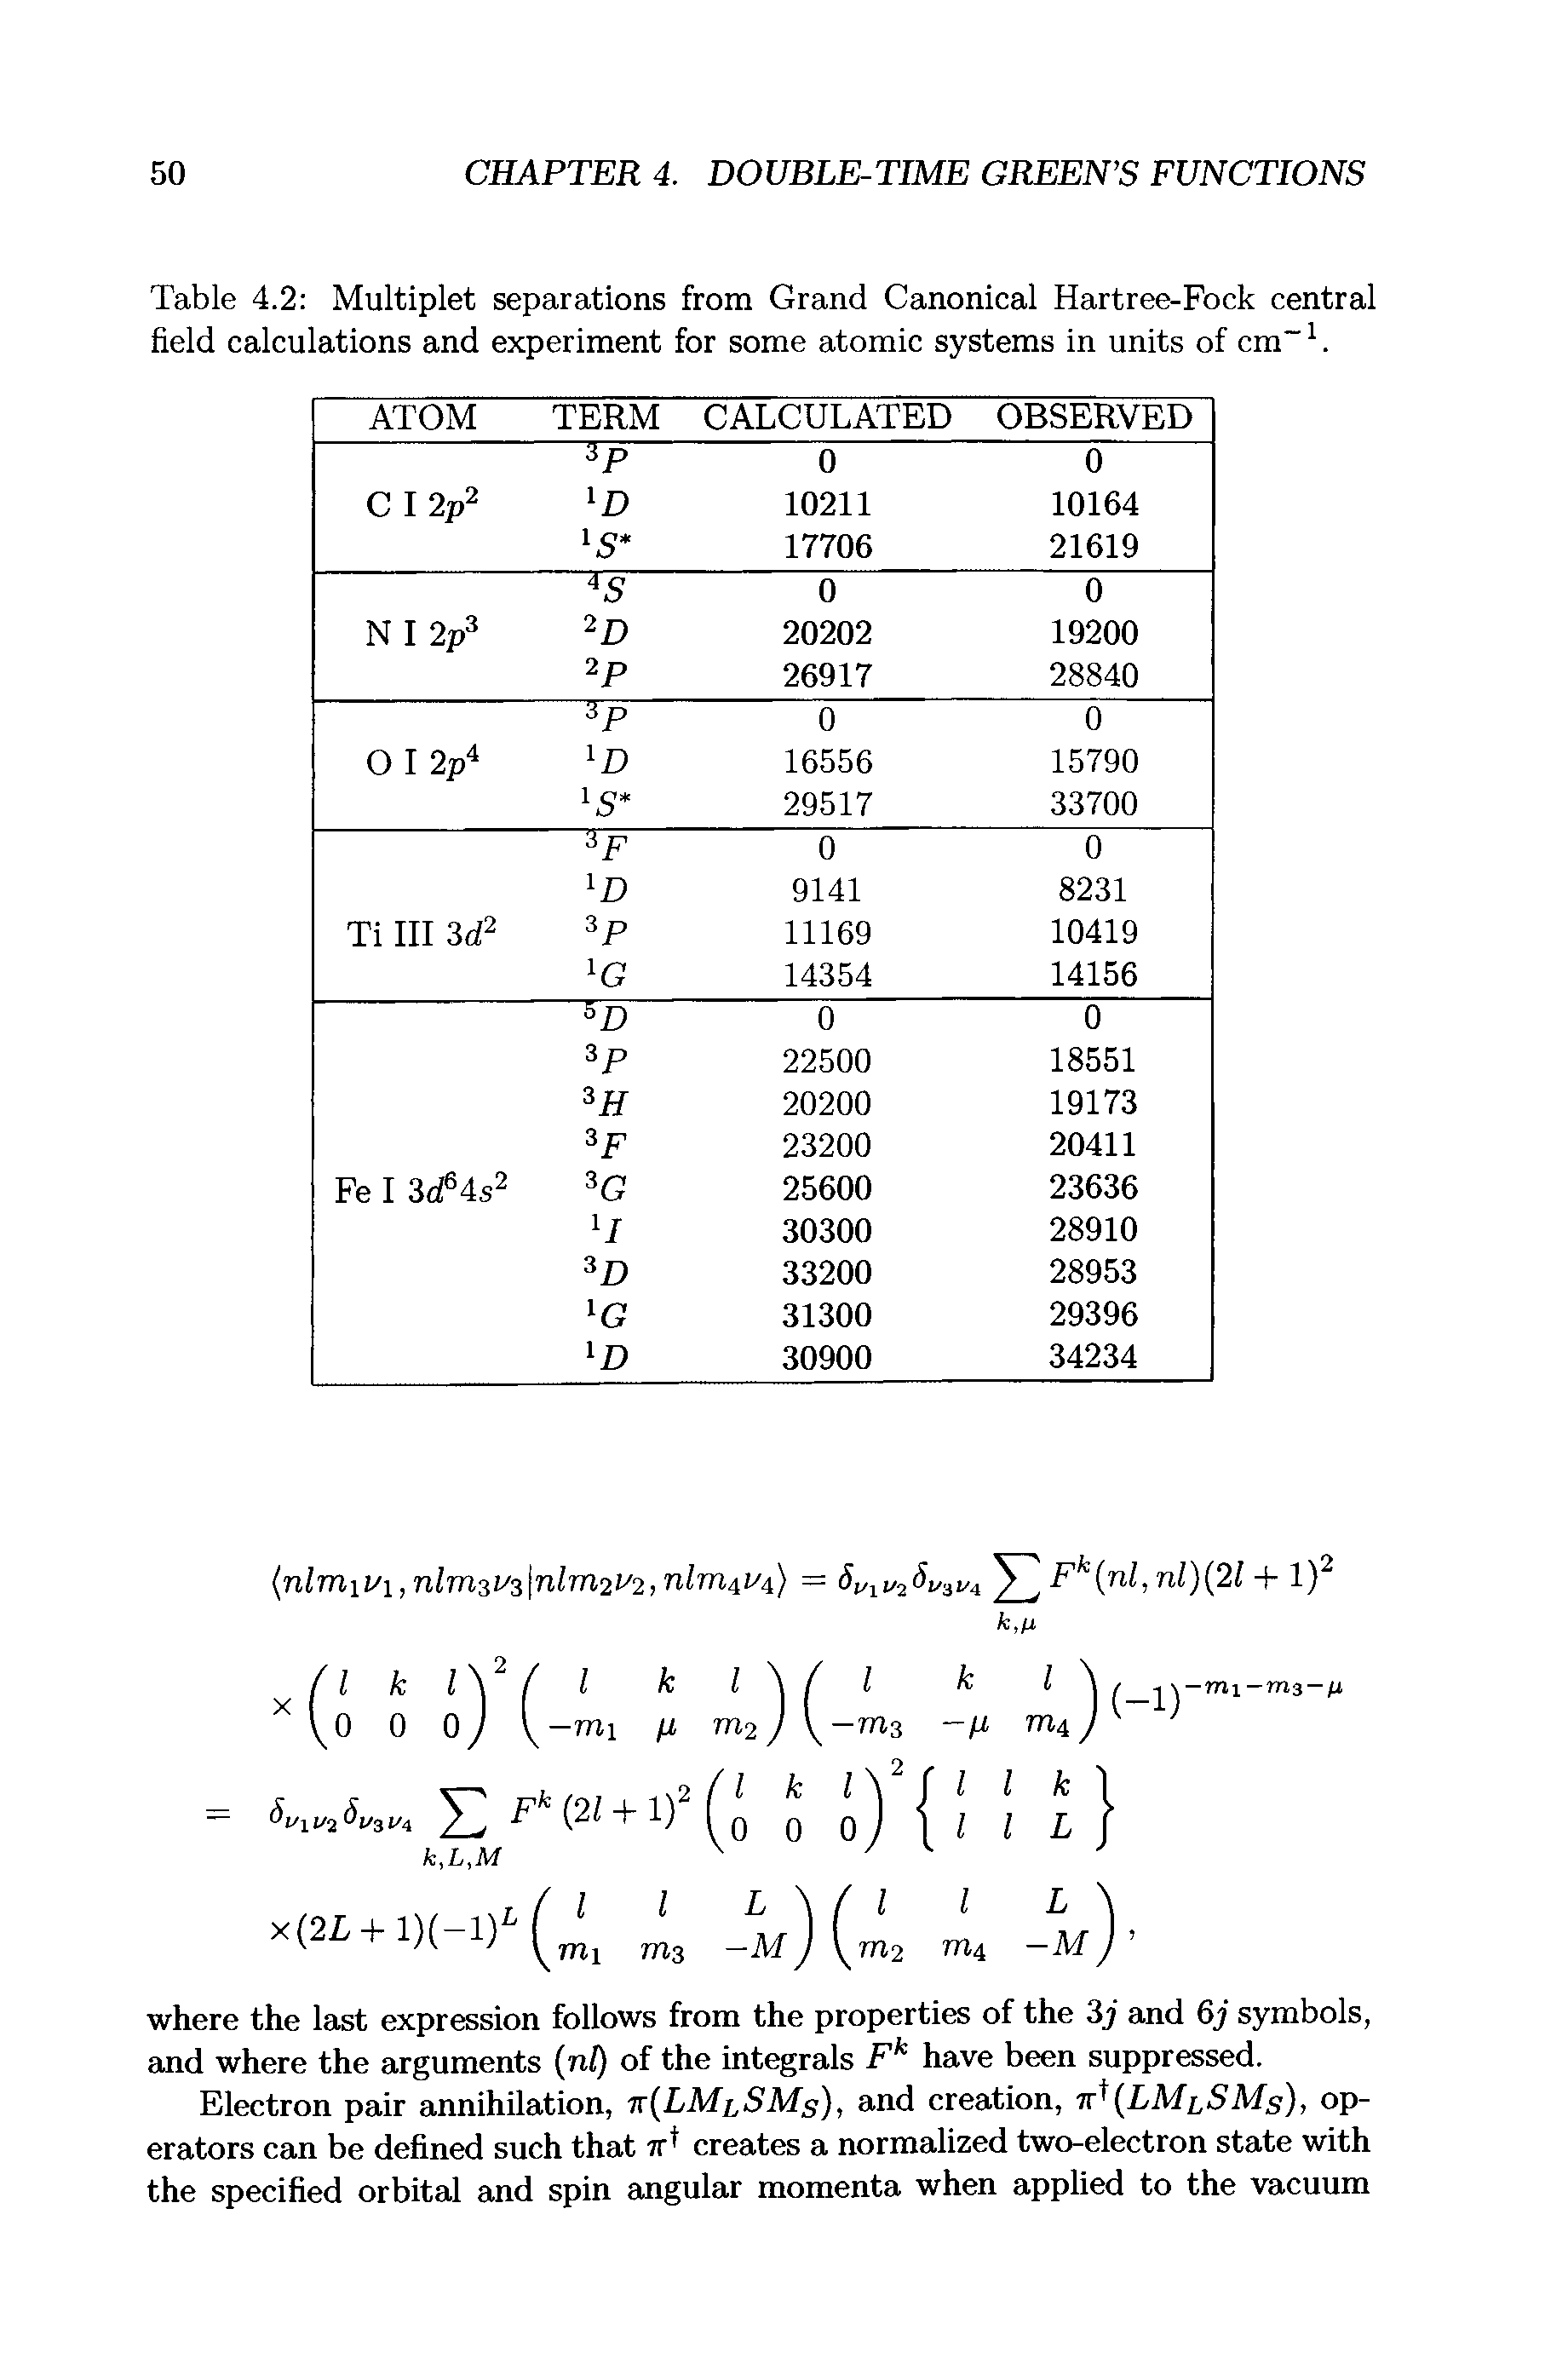 Table 4.2 Multiplet separations from Grand Canonical Hartree-Fock central field calculations and experiment for some atomic systems in units of cm. ...